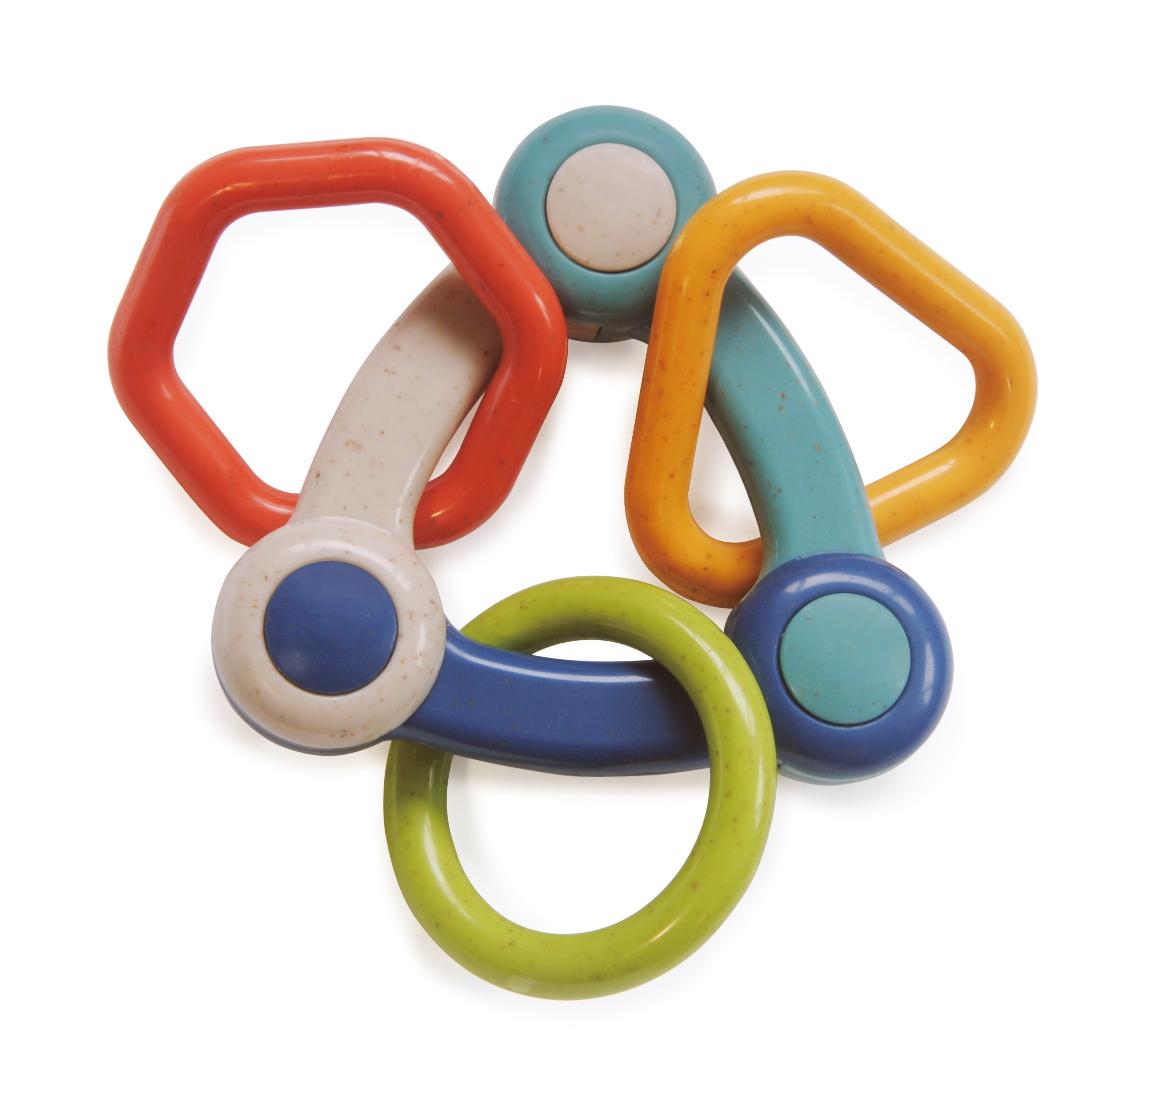 Tolo Triangle Rattle - Bio Range (For 3 months +)